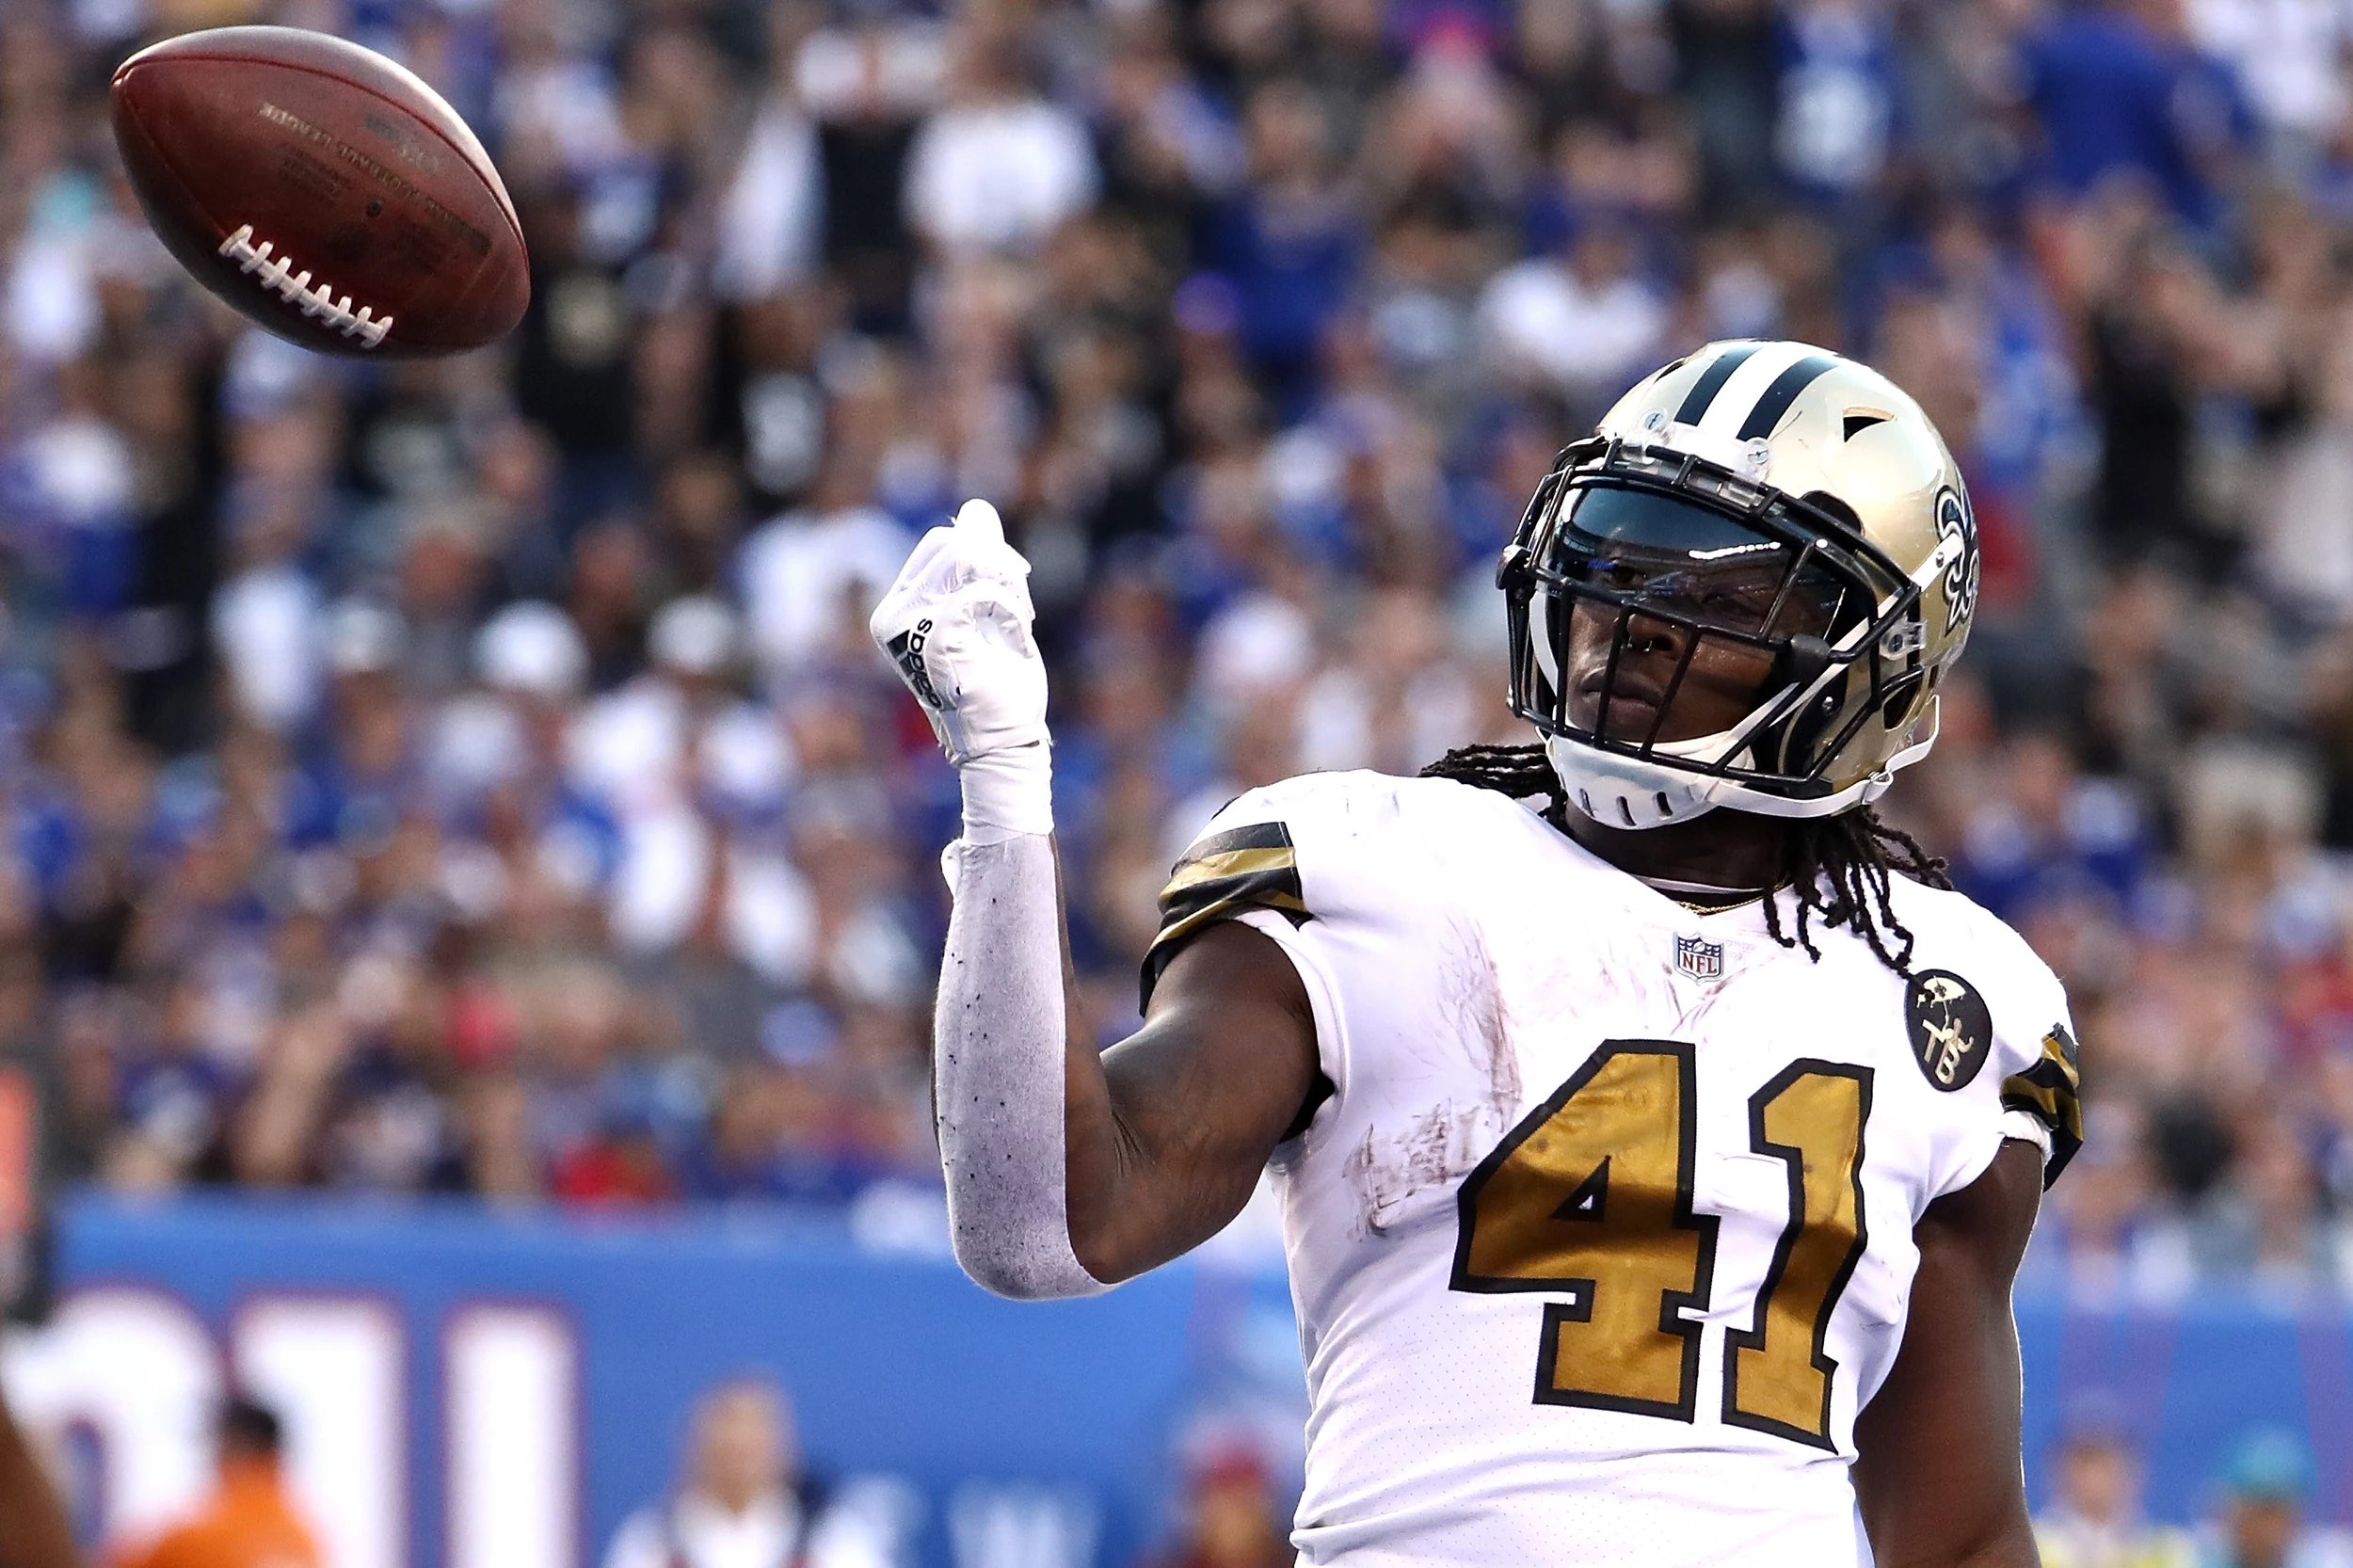 Why Does Alvin Kamara Wear That White Tape On His Arms?